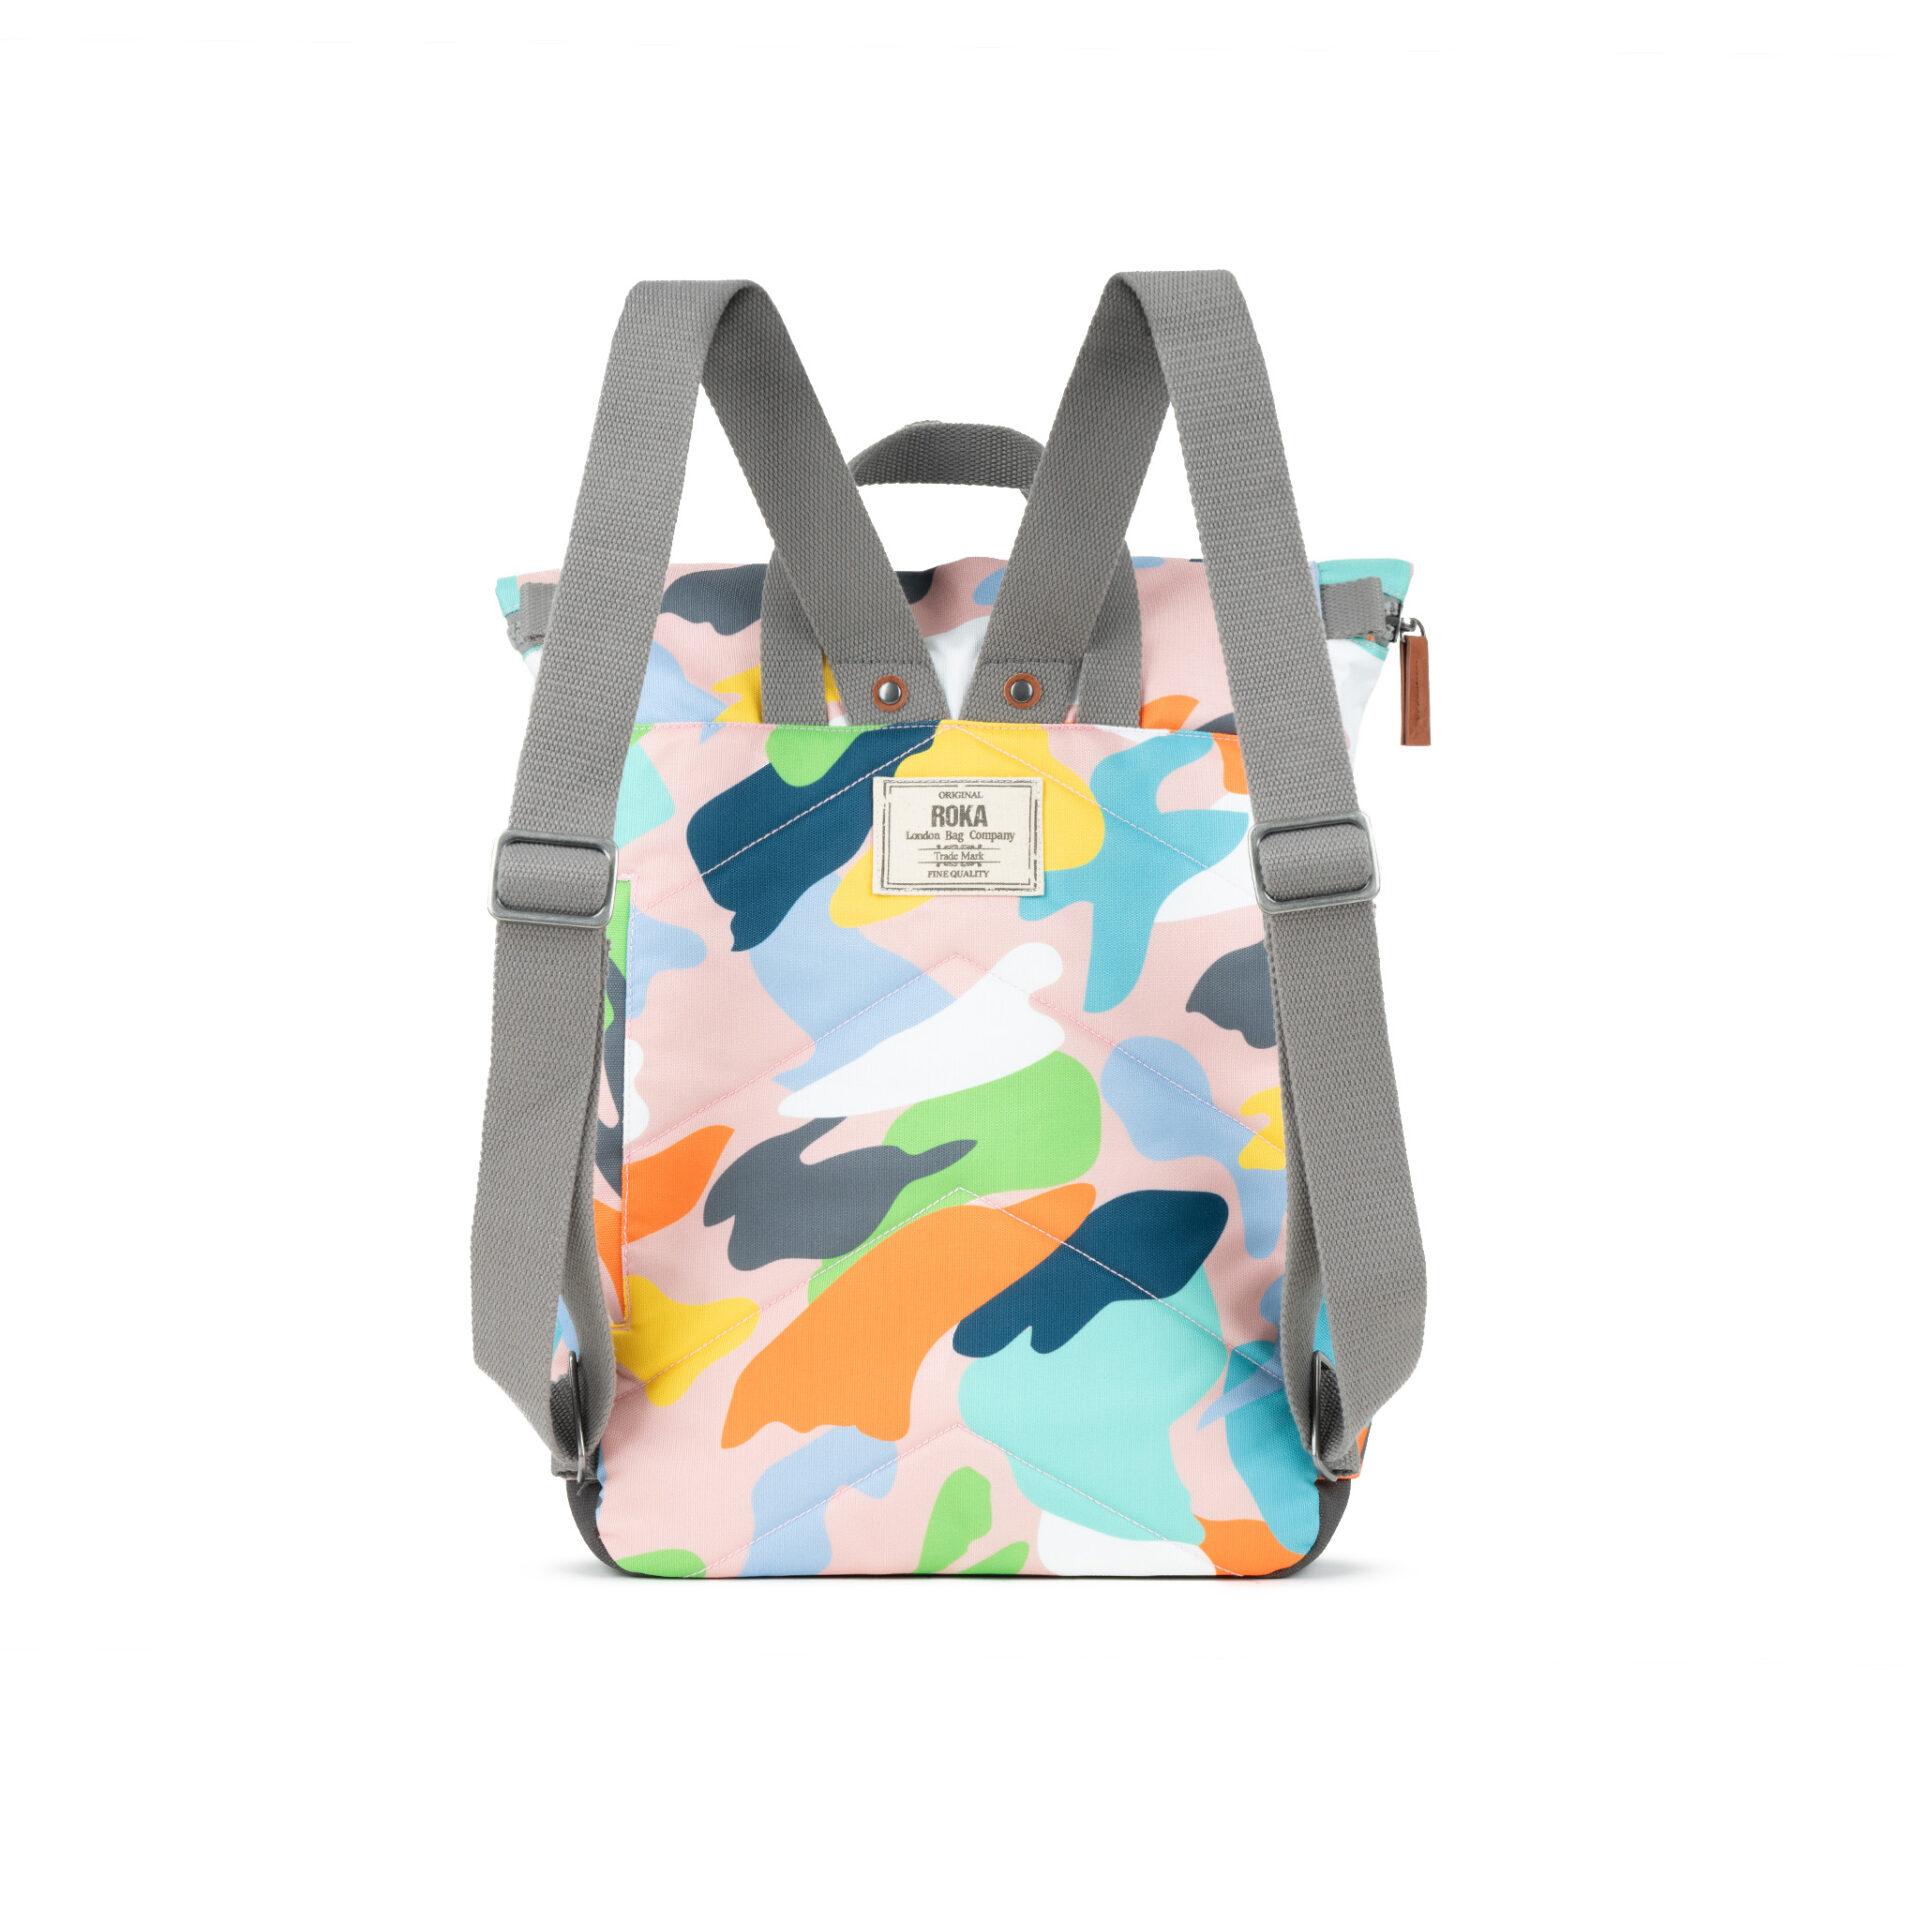 Roka canfield B mellow camo sustainable backpack